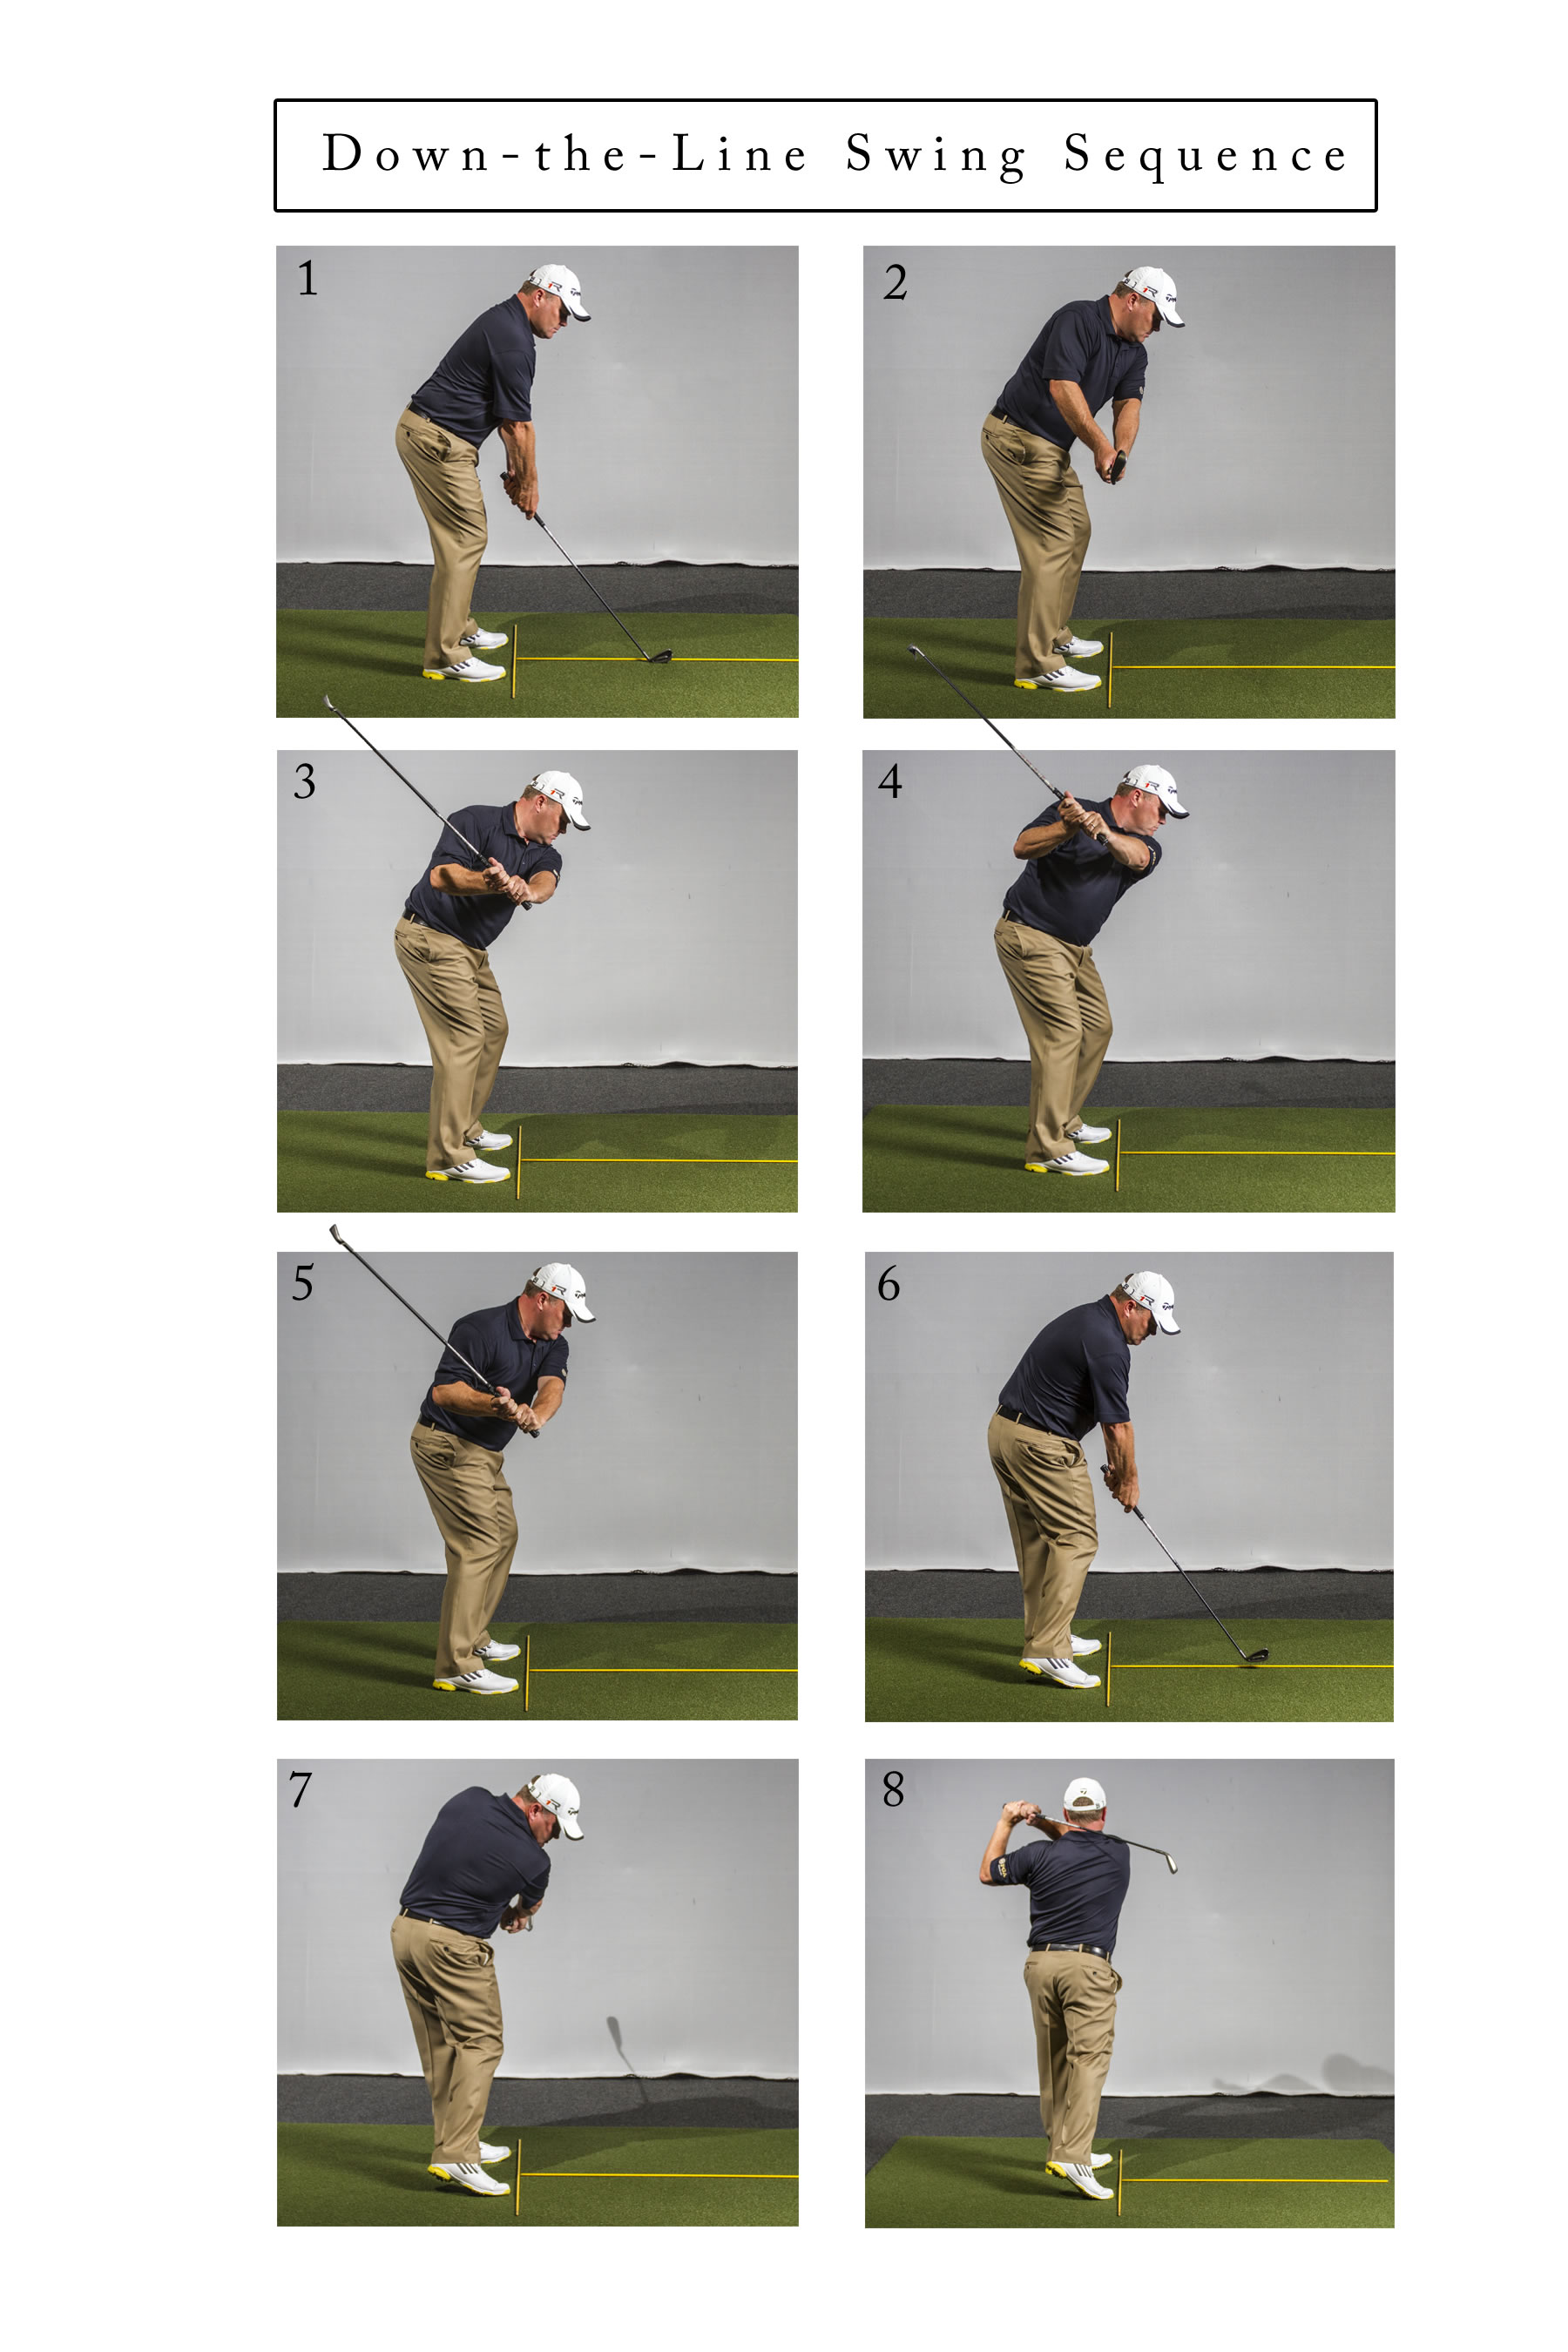 Do you know what the right positions are to control your golf ball?